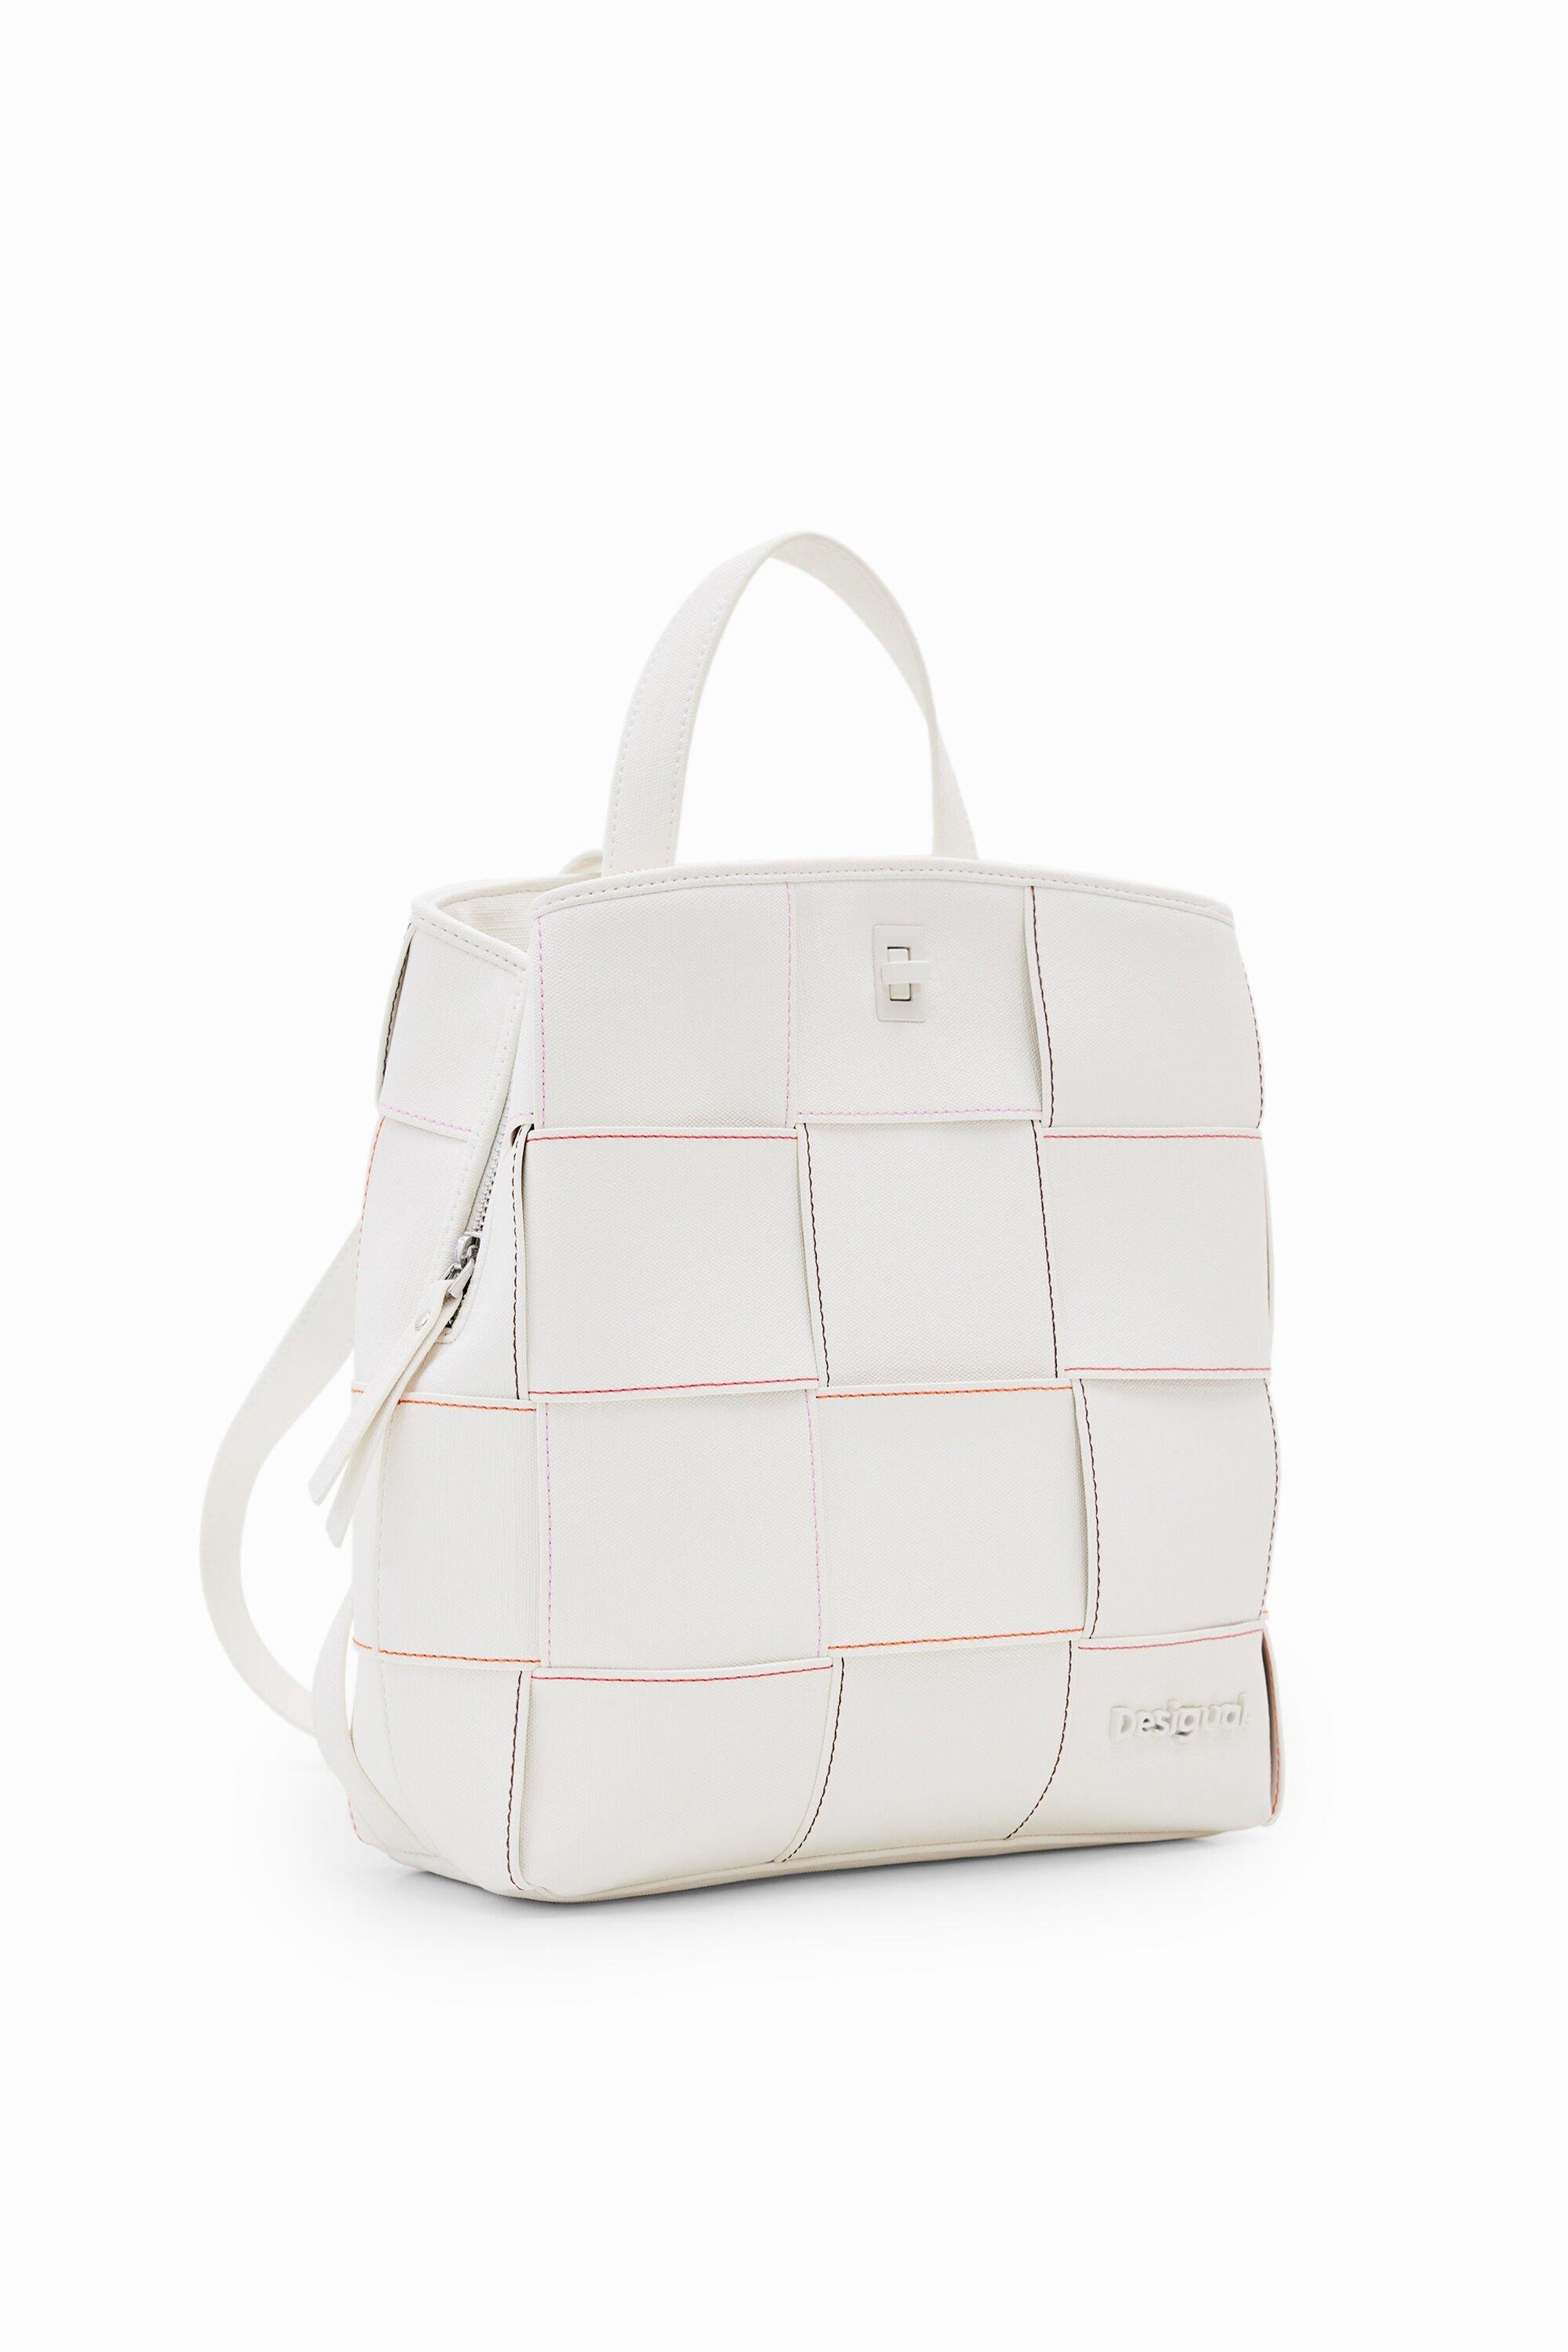 S woven backpack by DESIGUAL